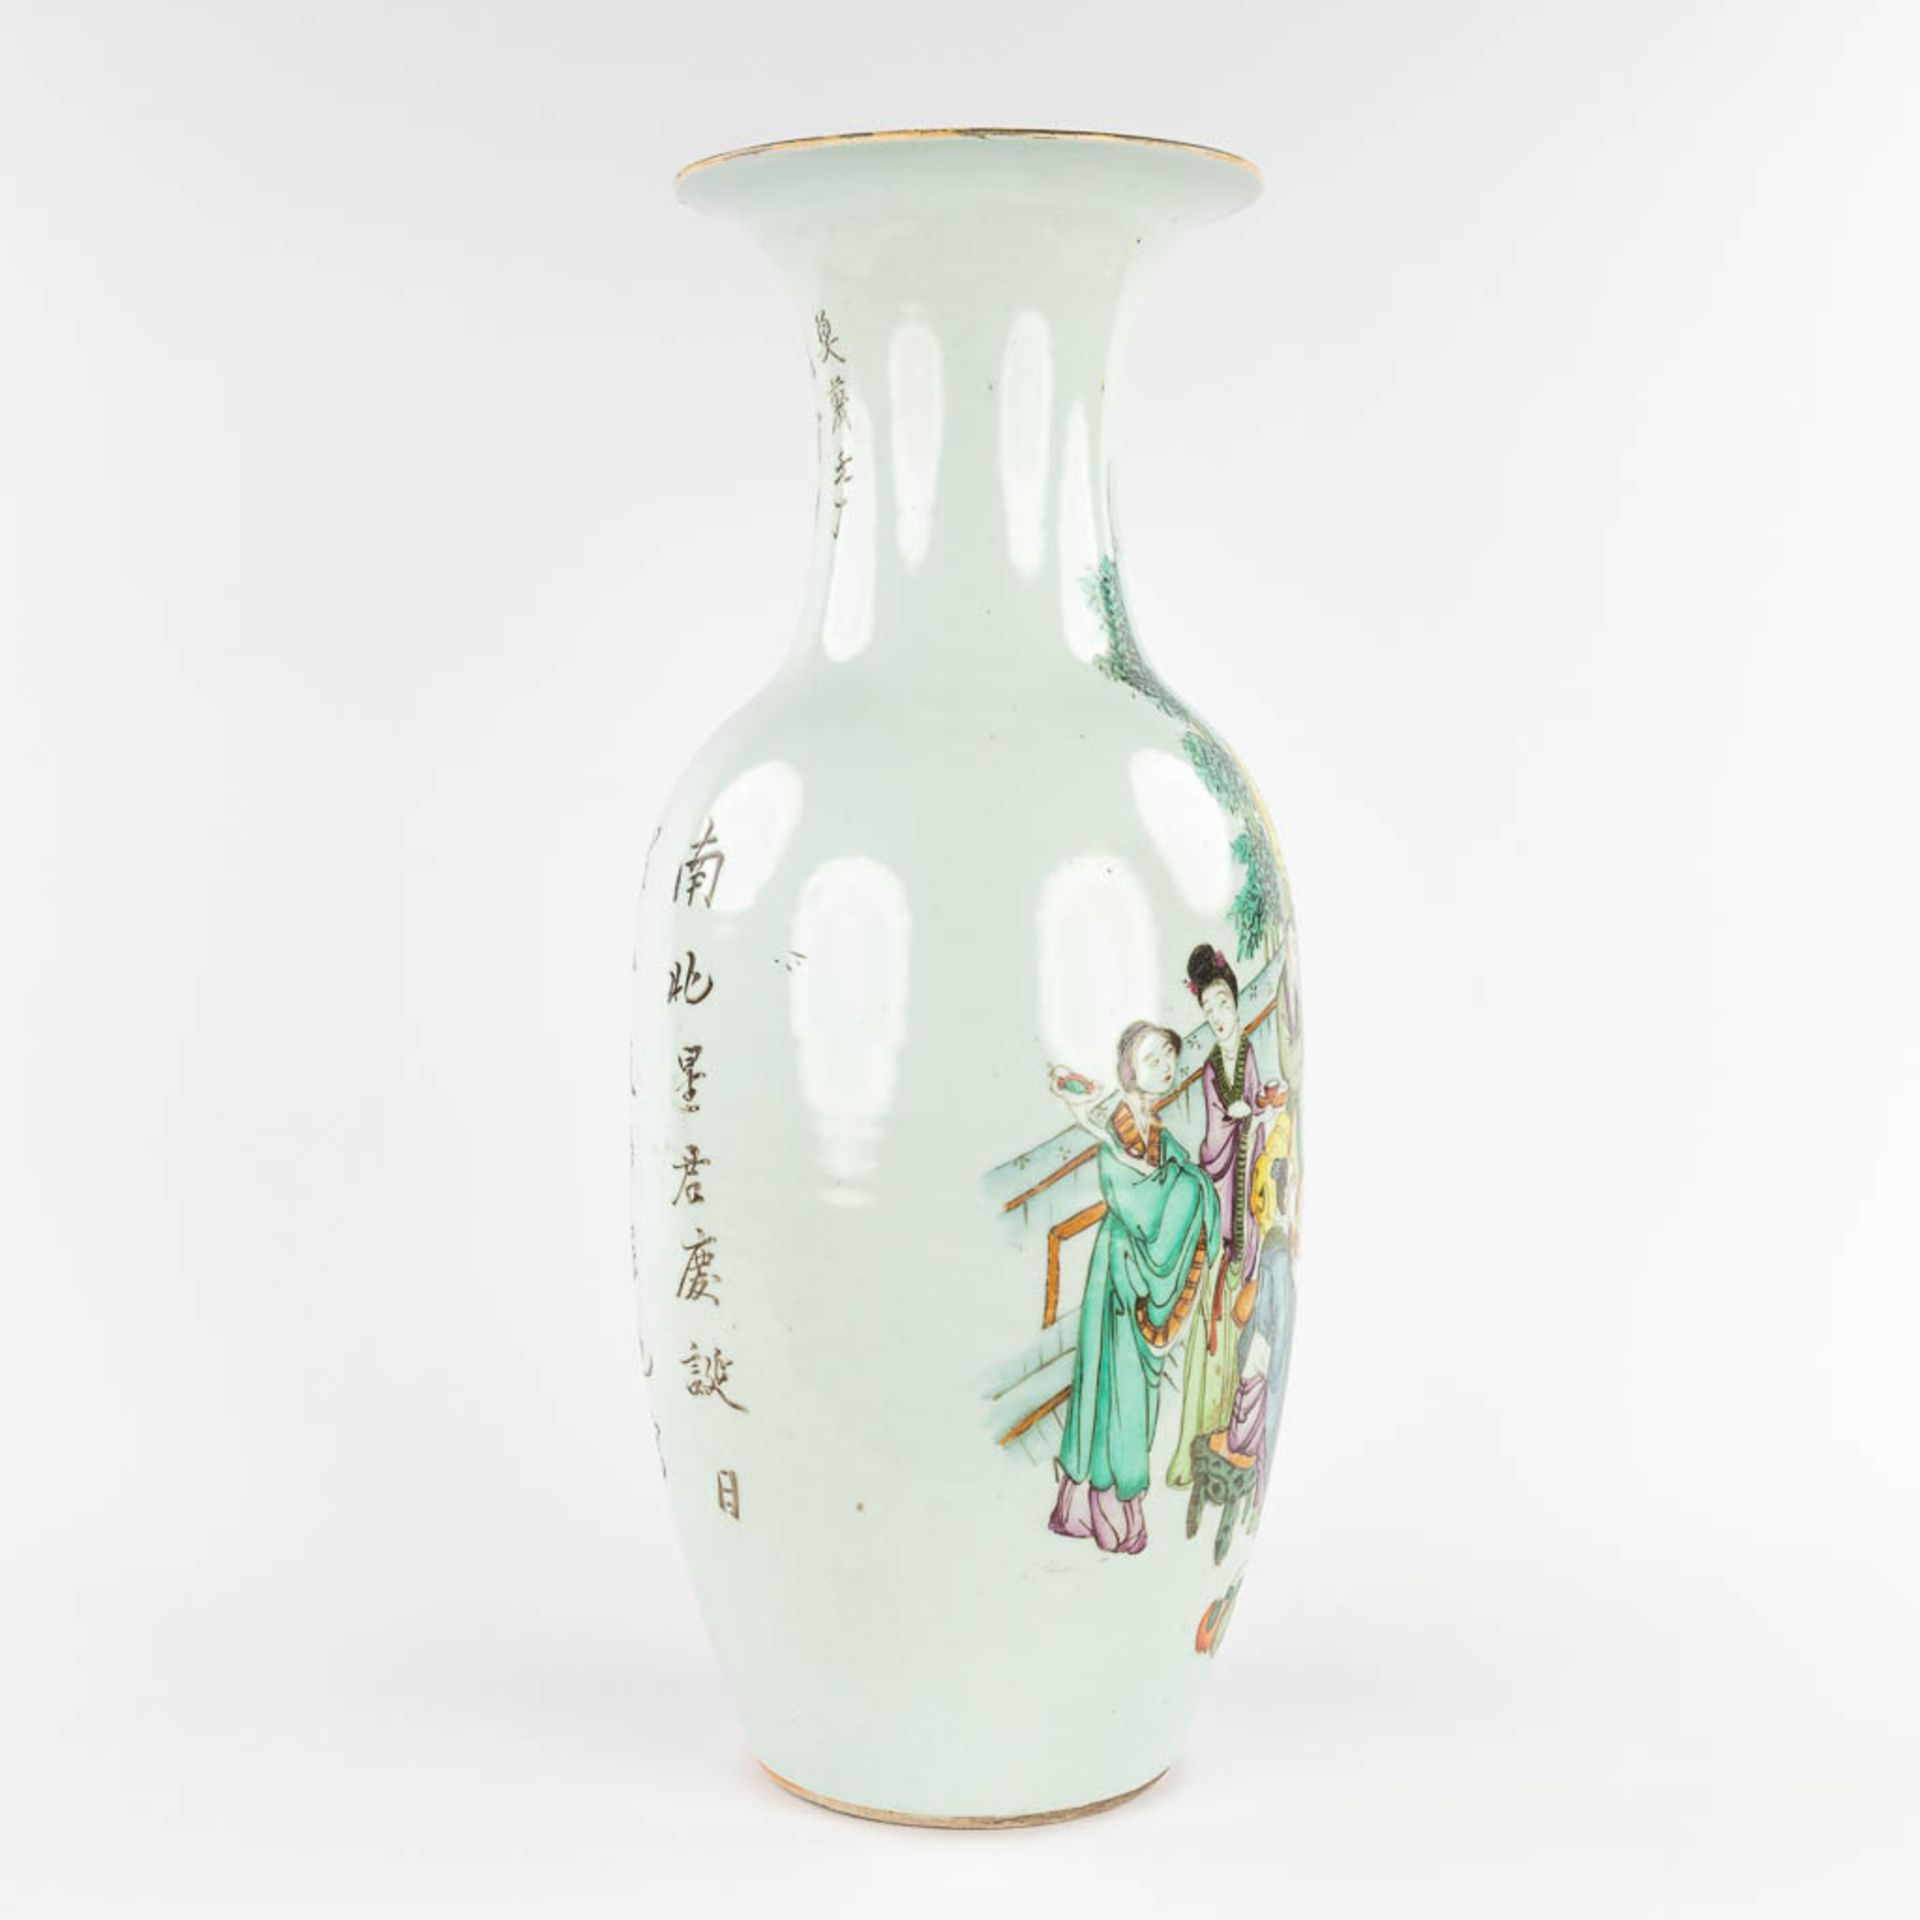 A Chinese vase, decorated with ladies and an emperor. 19th/20th C. (H:57 x D:23 cm) - Image 4 of 14